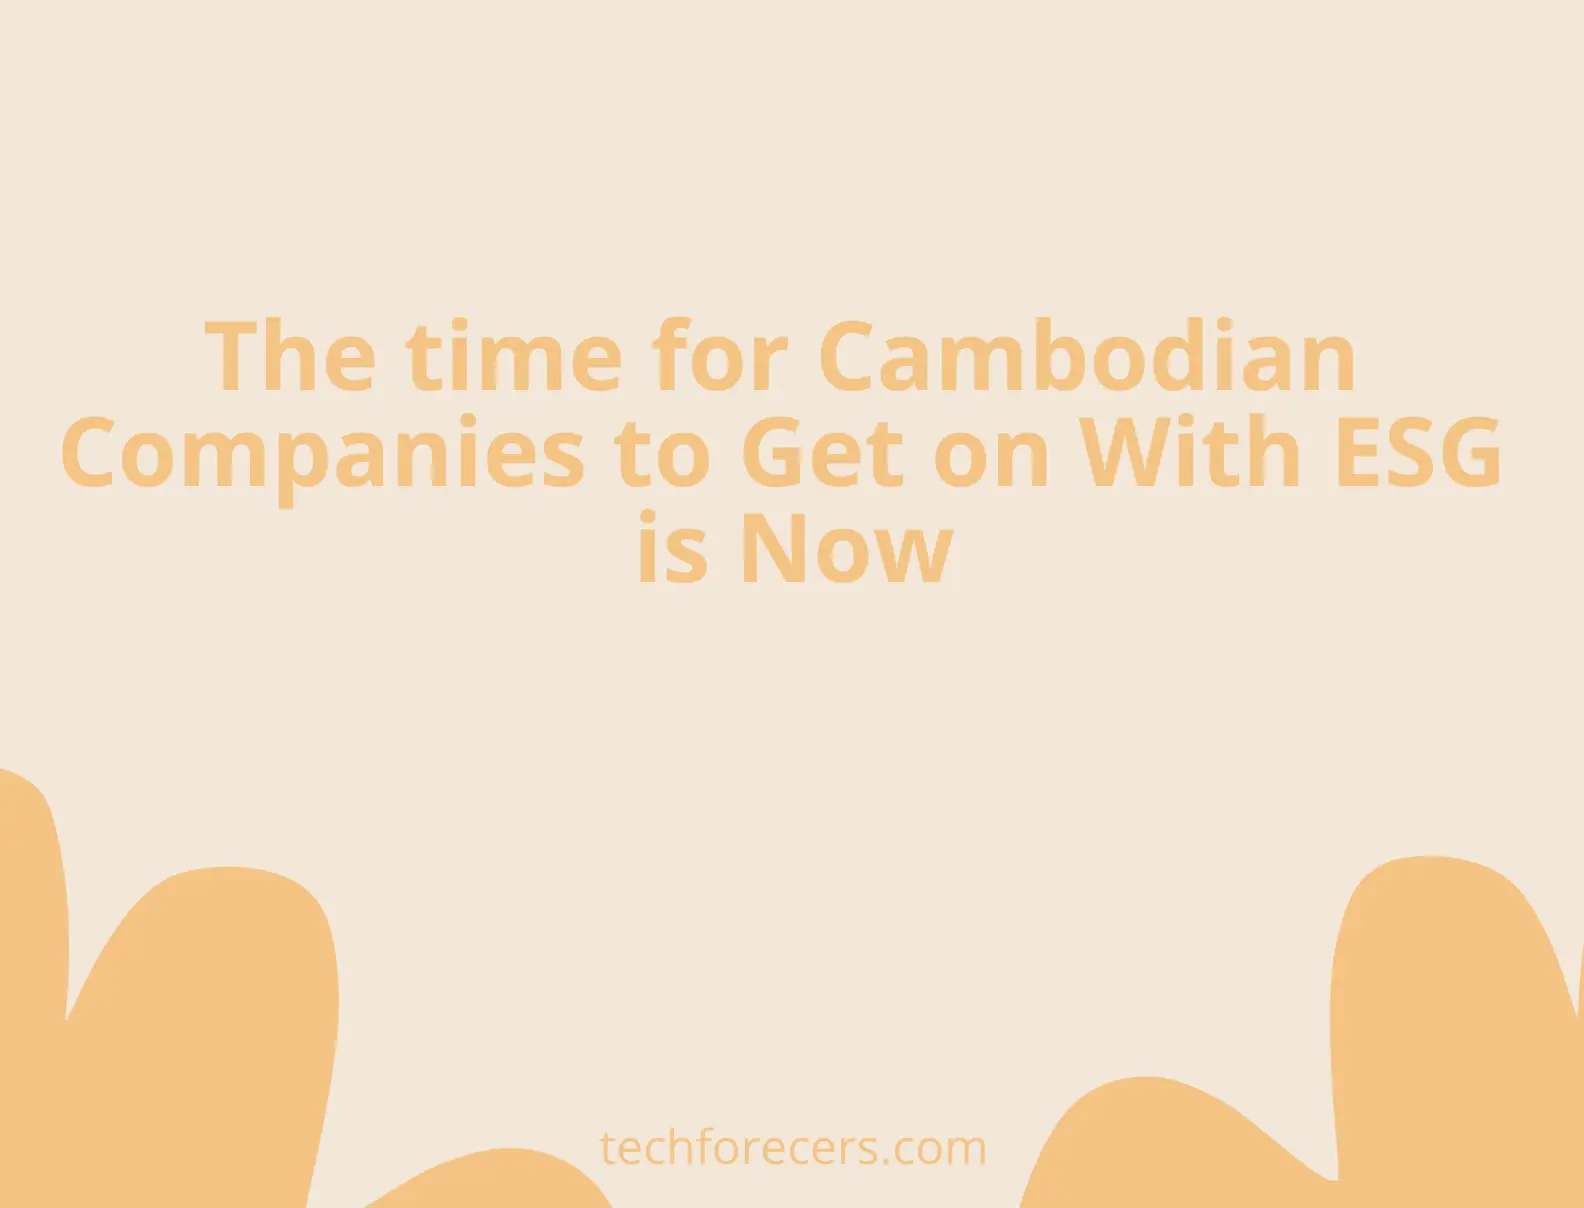 The time for Cambodian Companies to Get on With ESG is Now